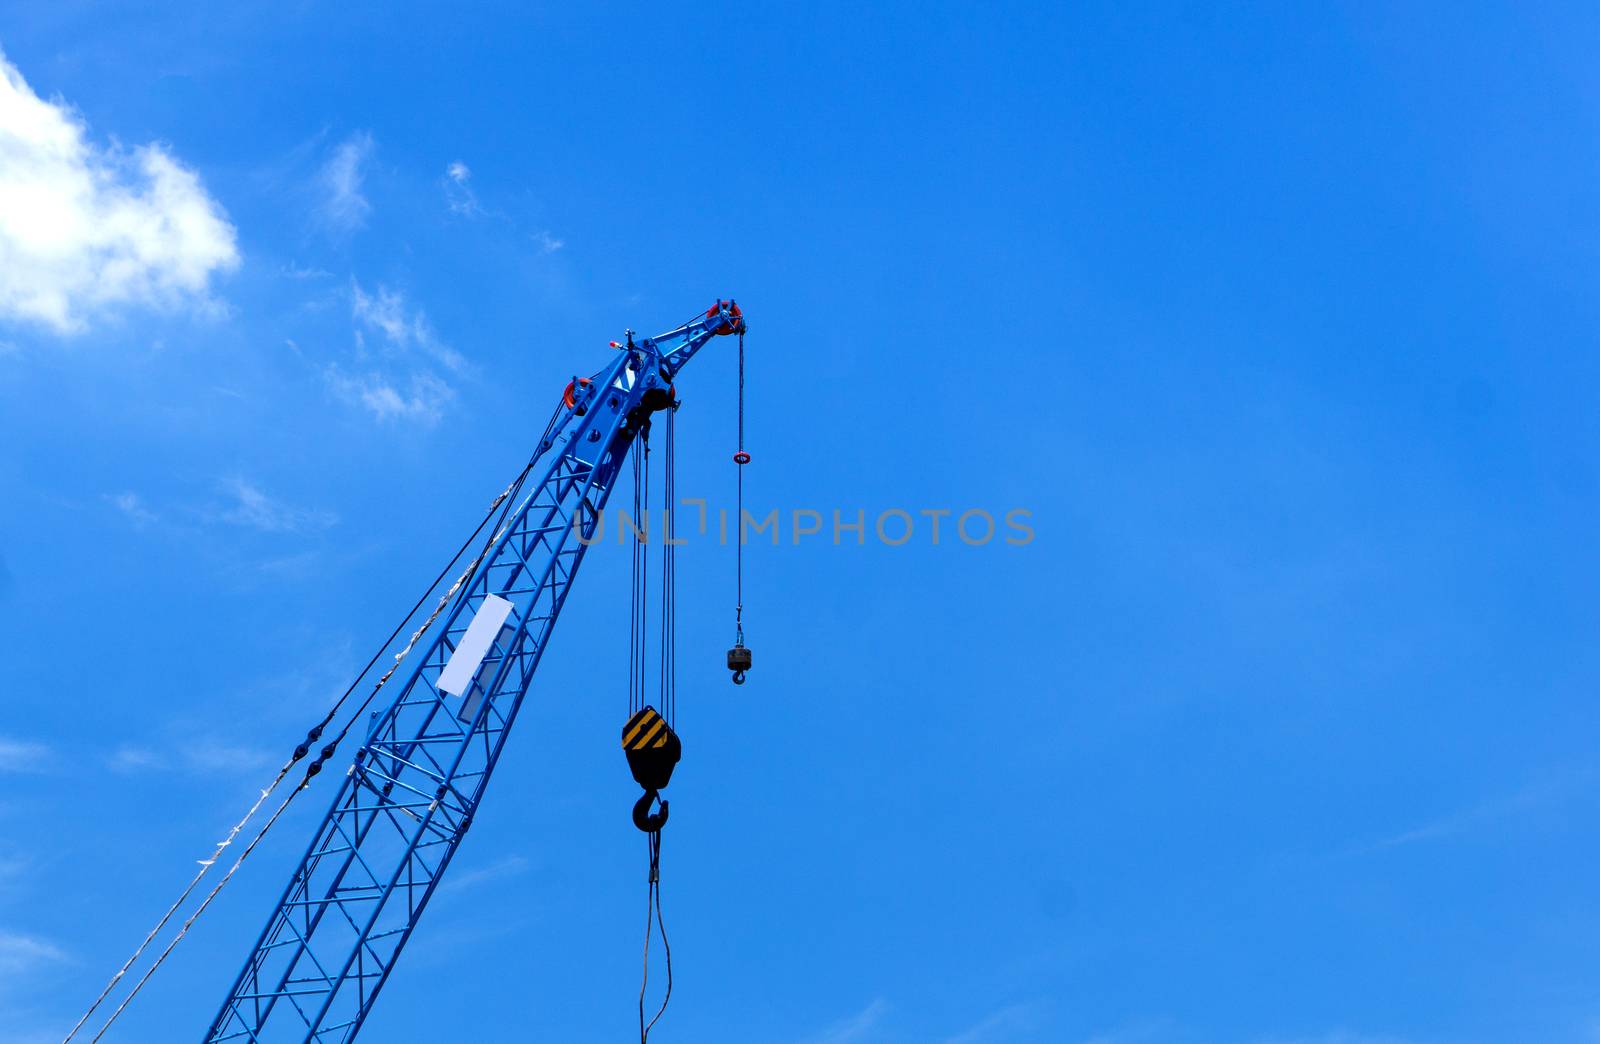 Blue Construction crane on blue sky background in progress at Construction Site.